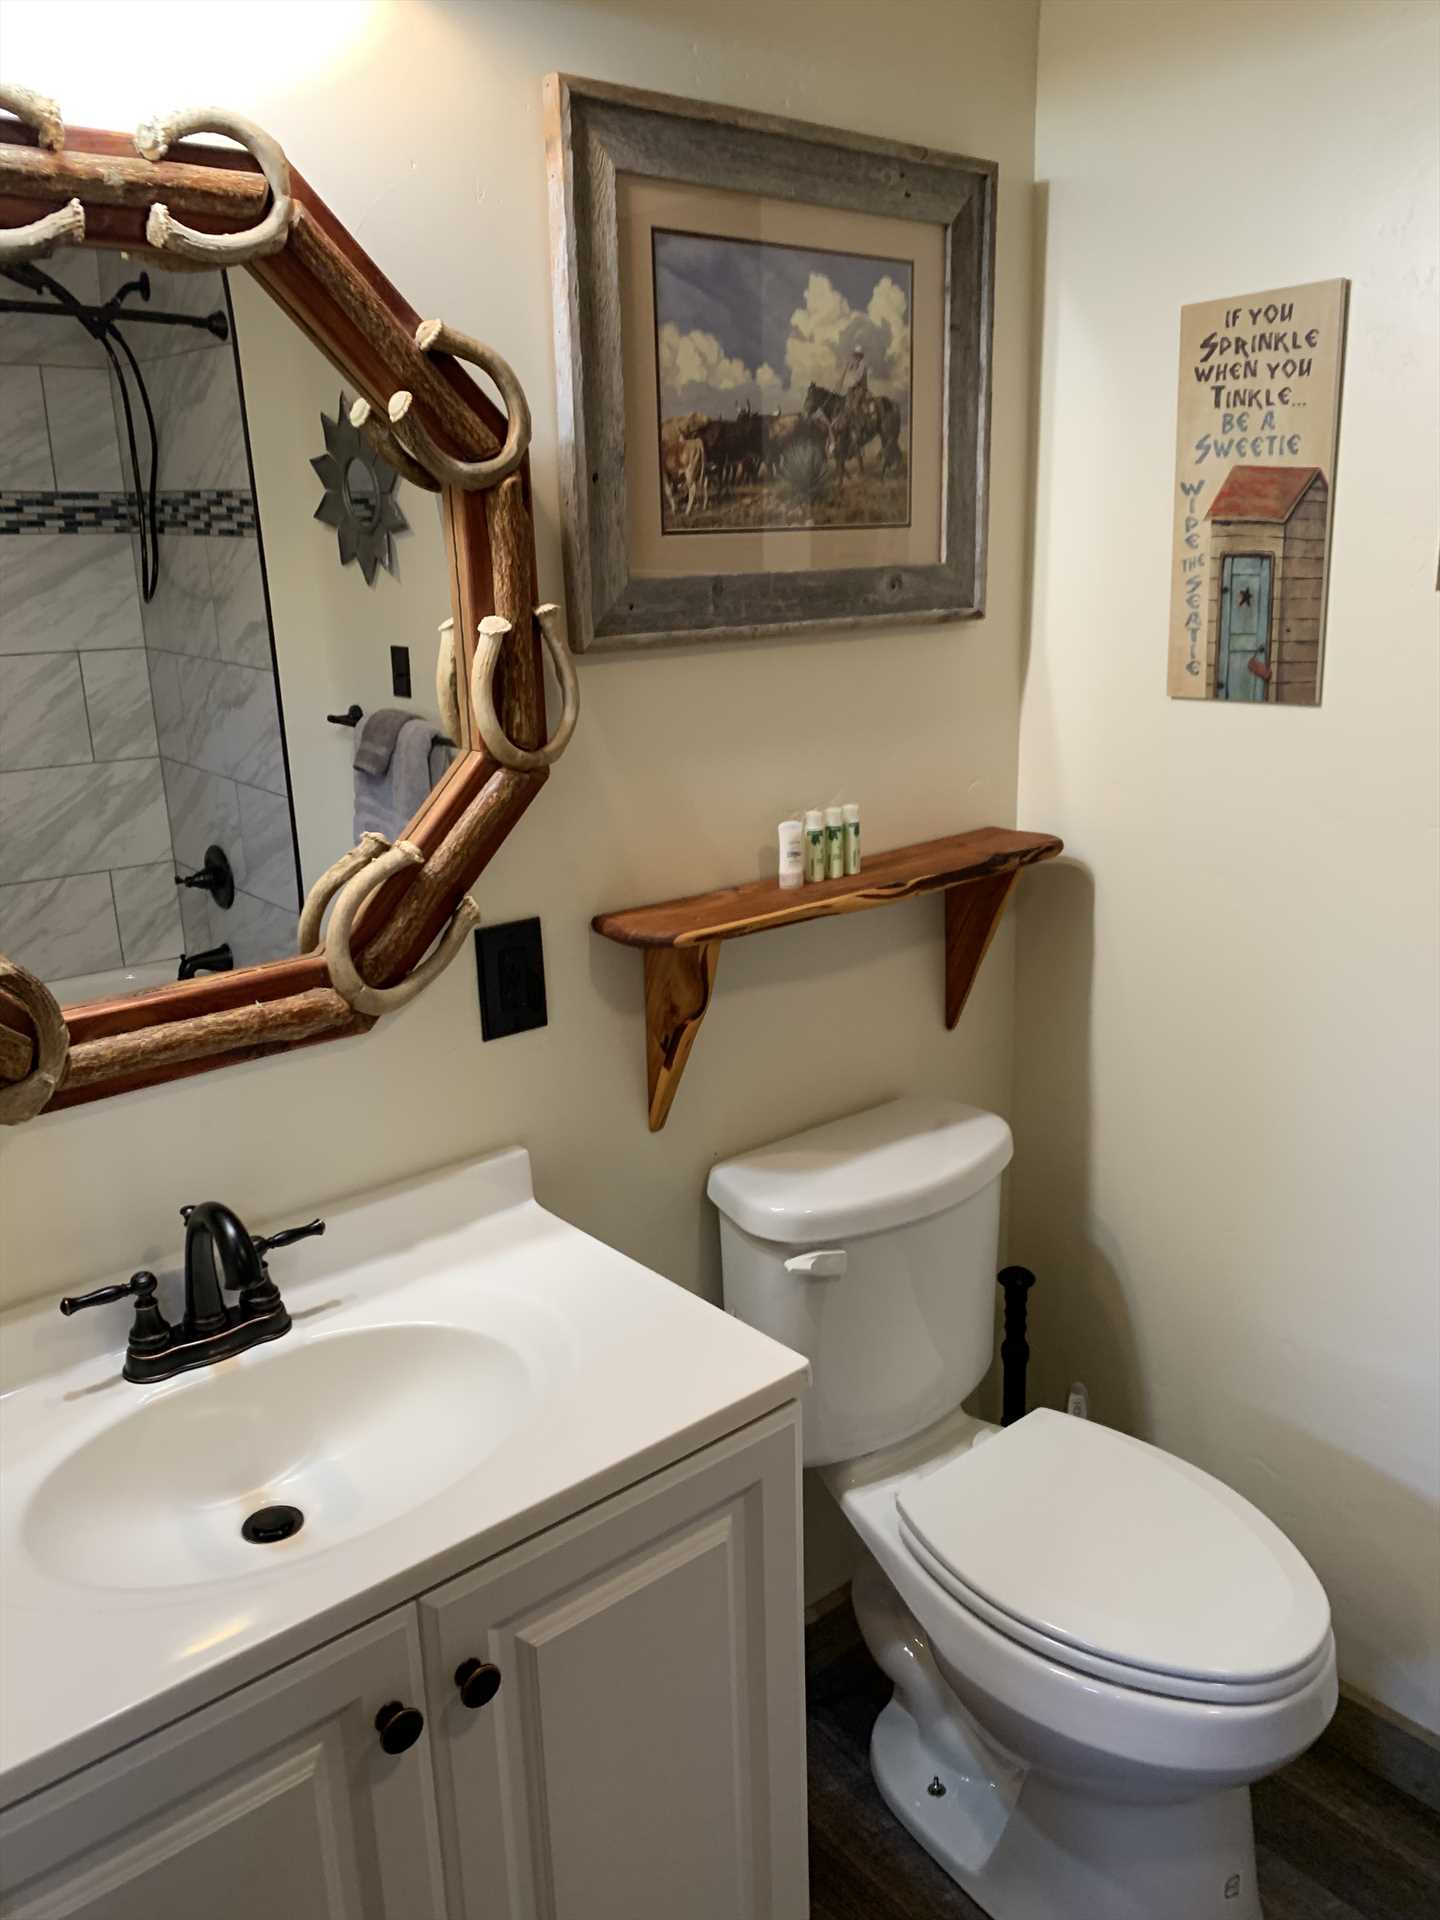                                                 Horseshoes surround the bath mirror for luck, and all the clean and soft linens you'll need are provided.